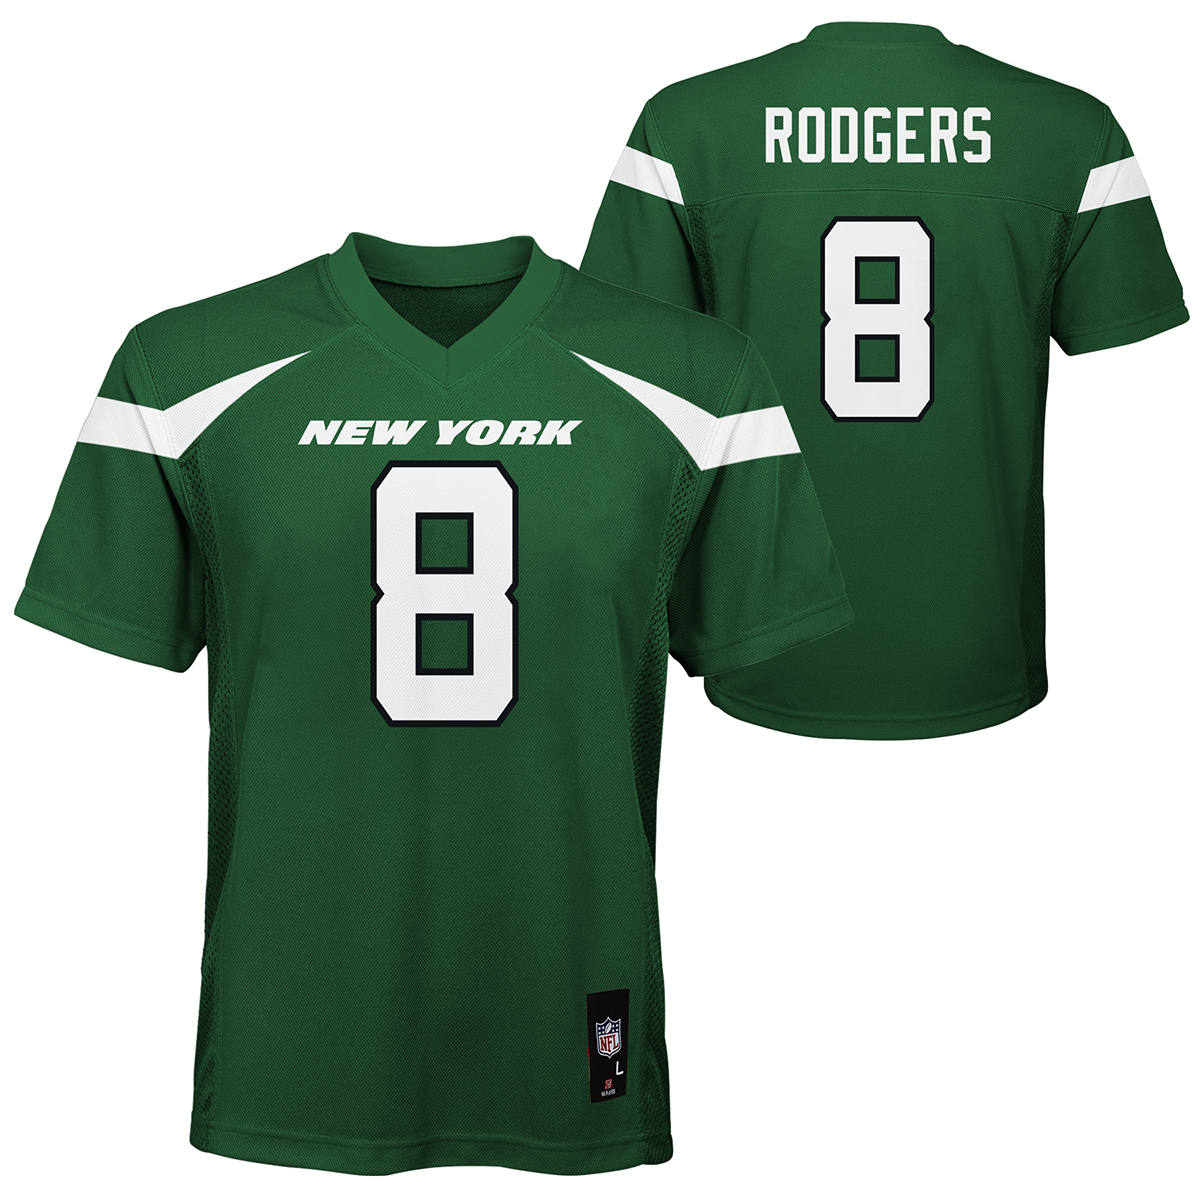 New York Jets Kids' Outerstuff Aaron Rodgers Jersey